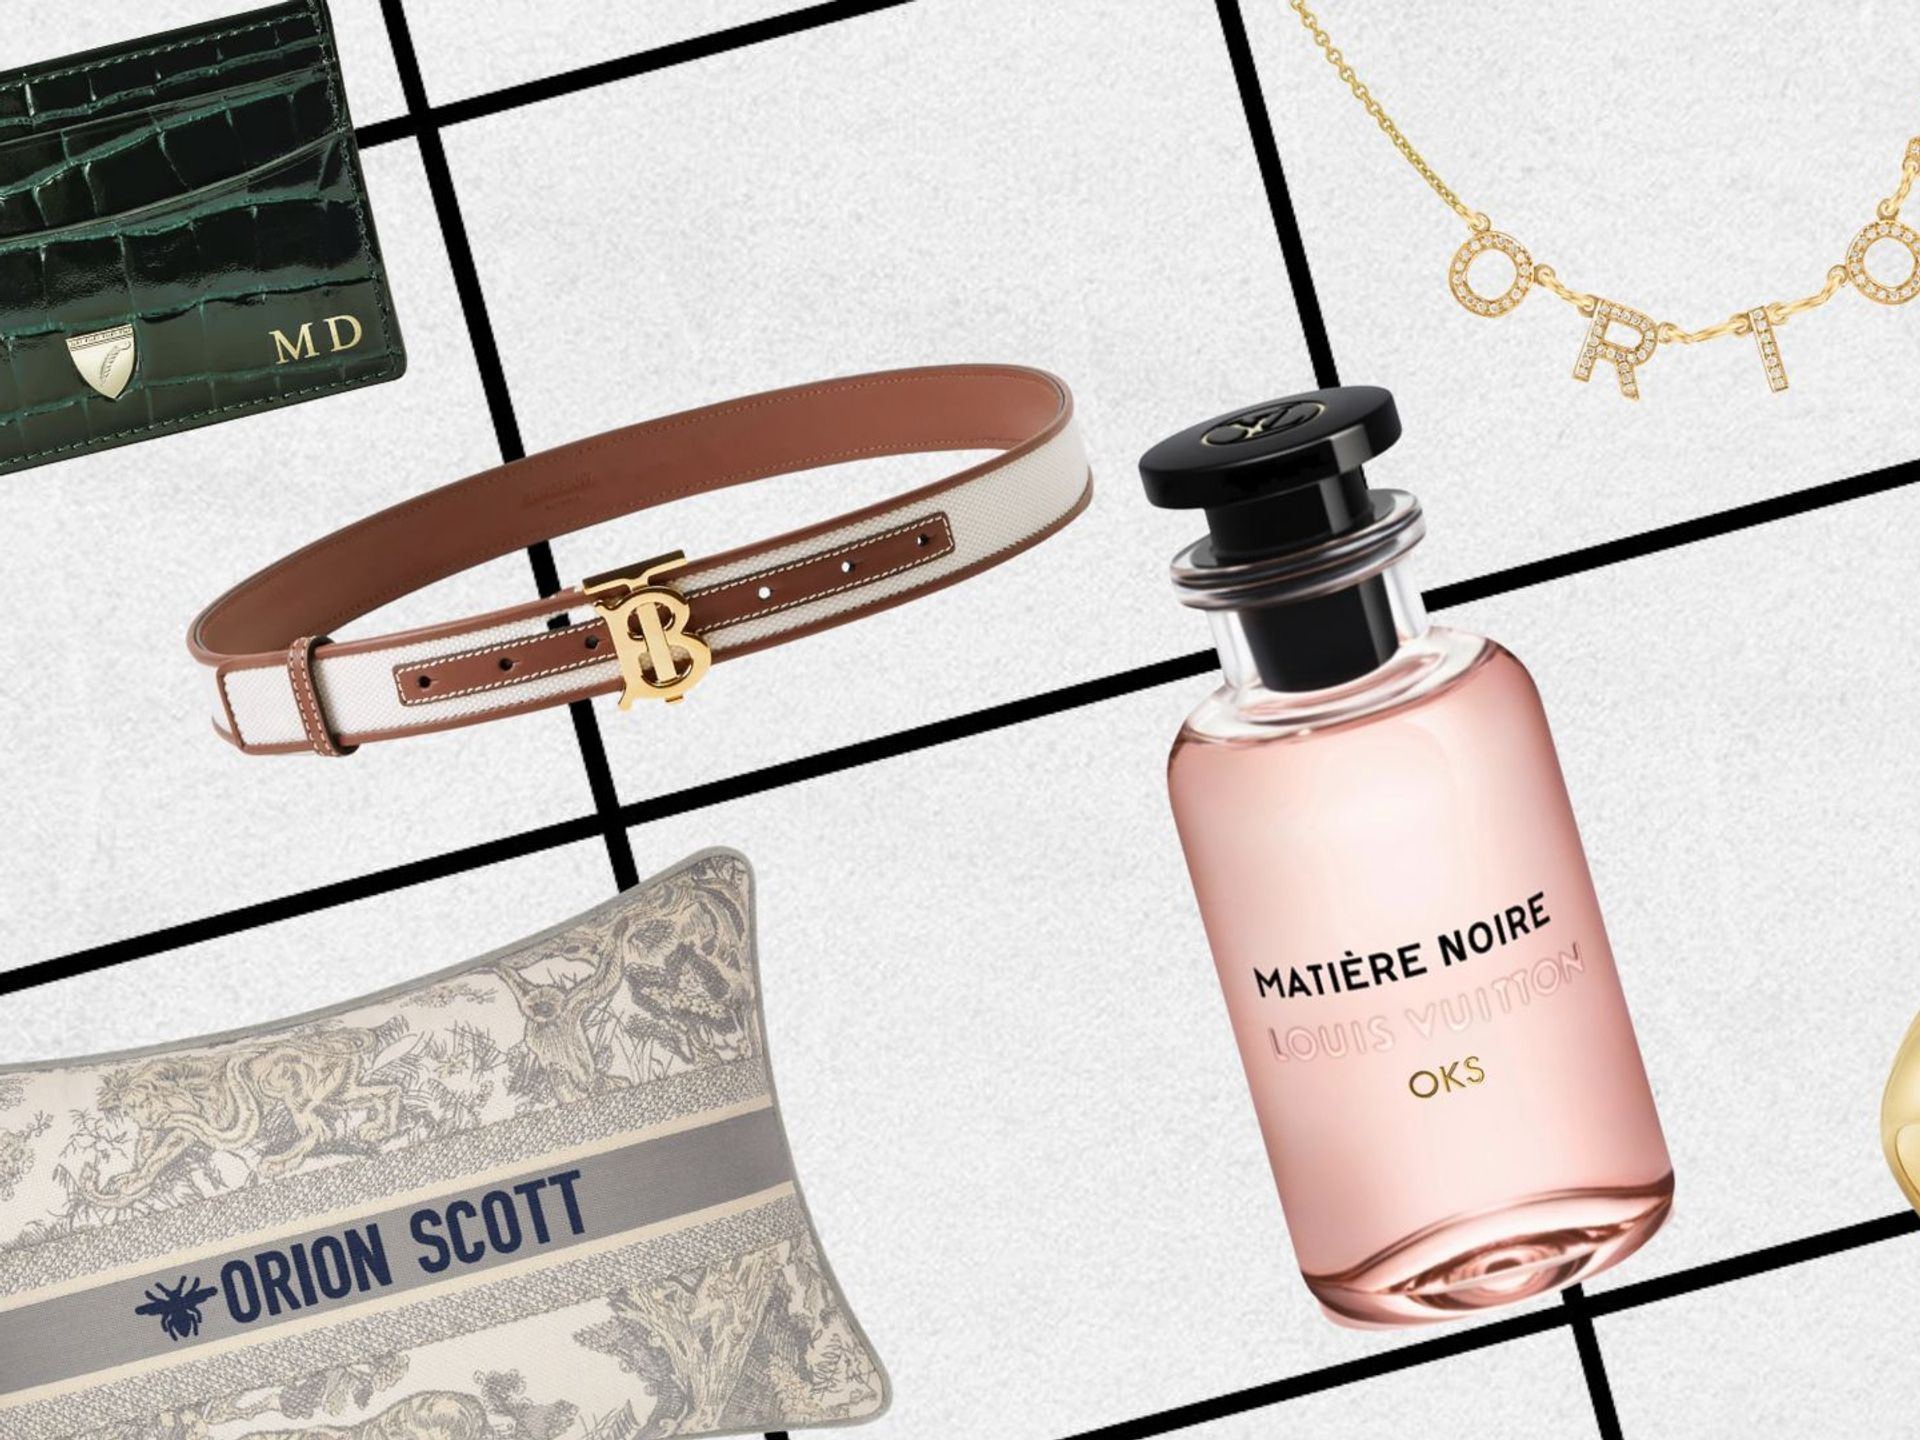 The Best Gifts for $100 in 2023: Luxury Gifts Under $100